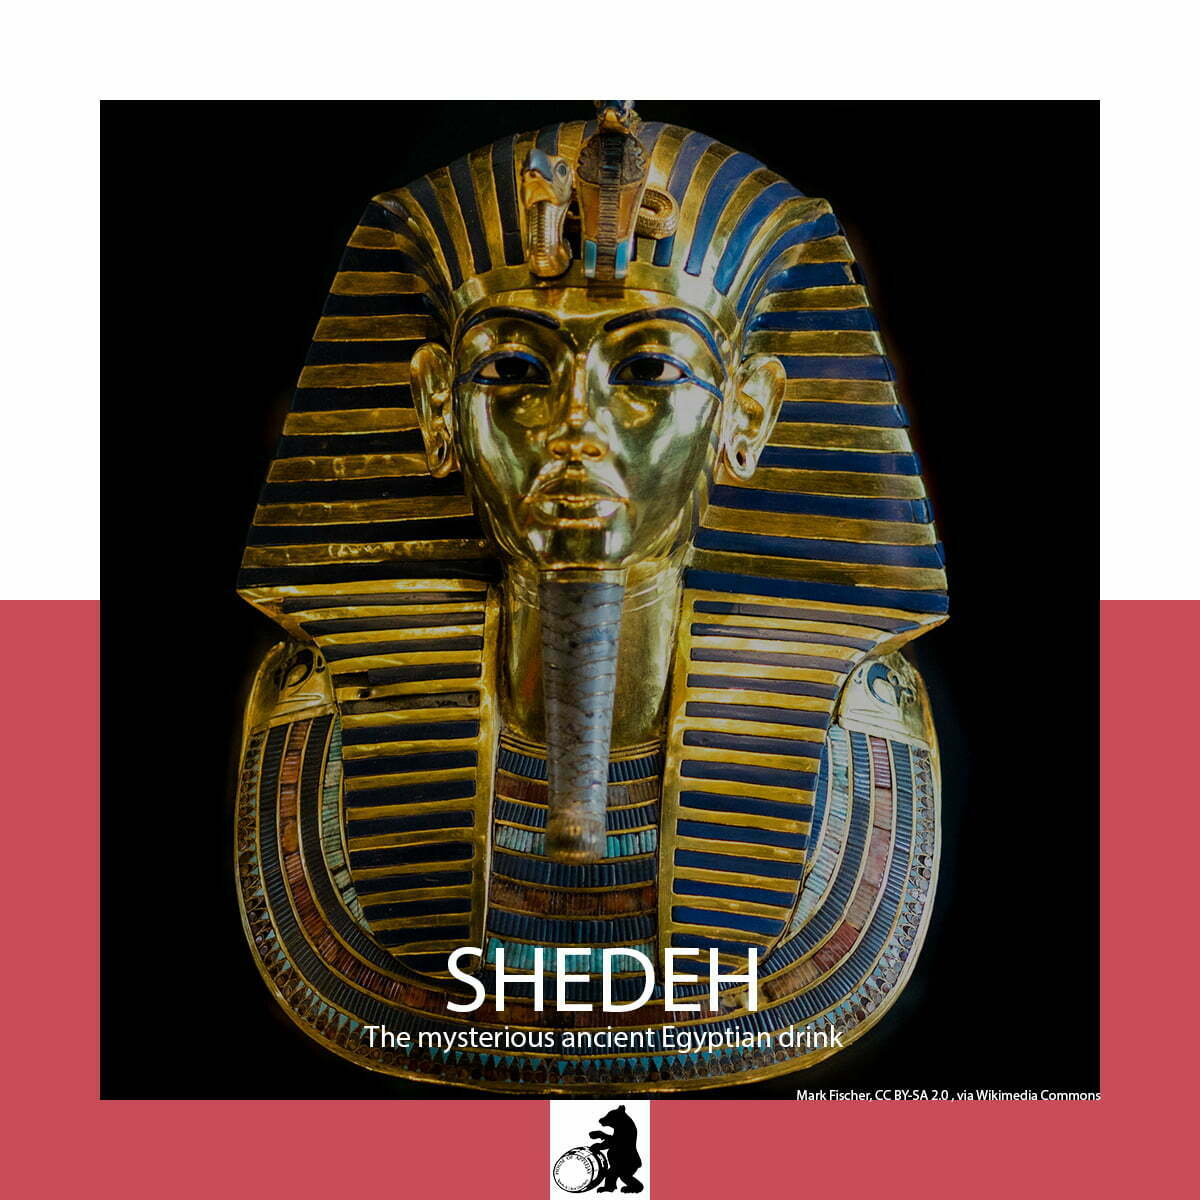 Shedeh